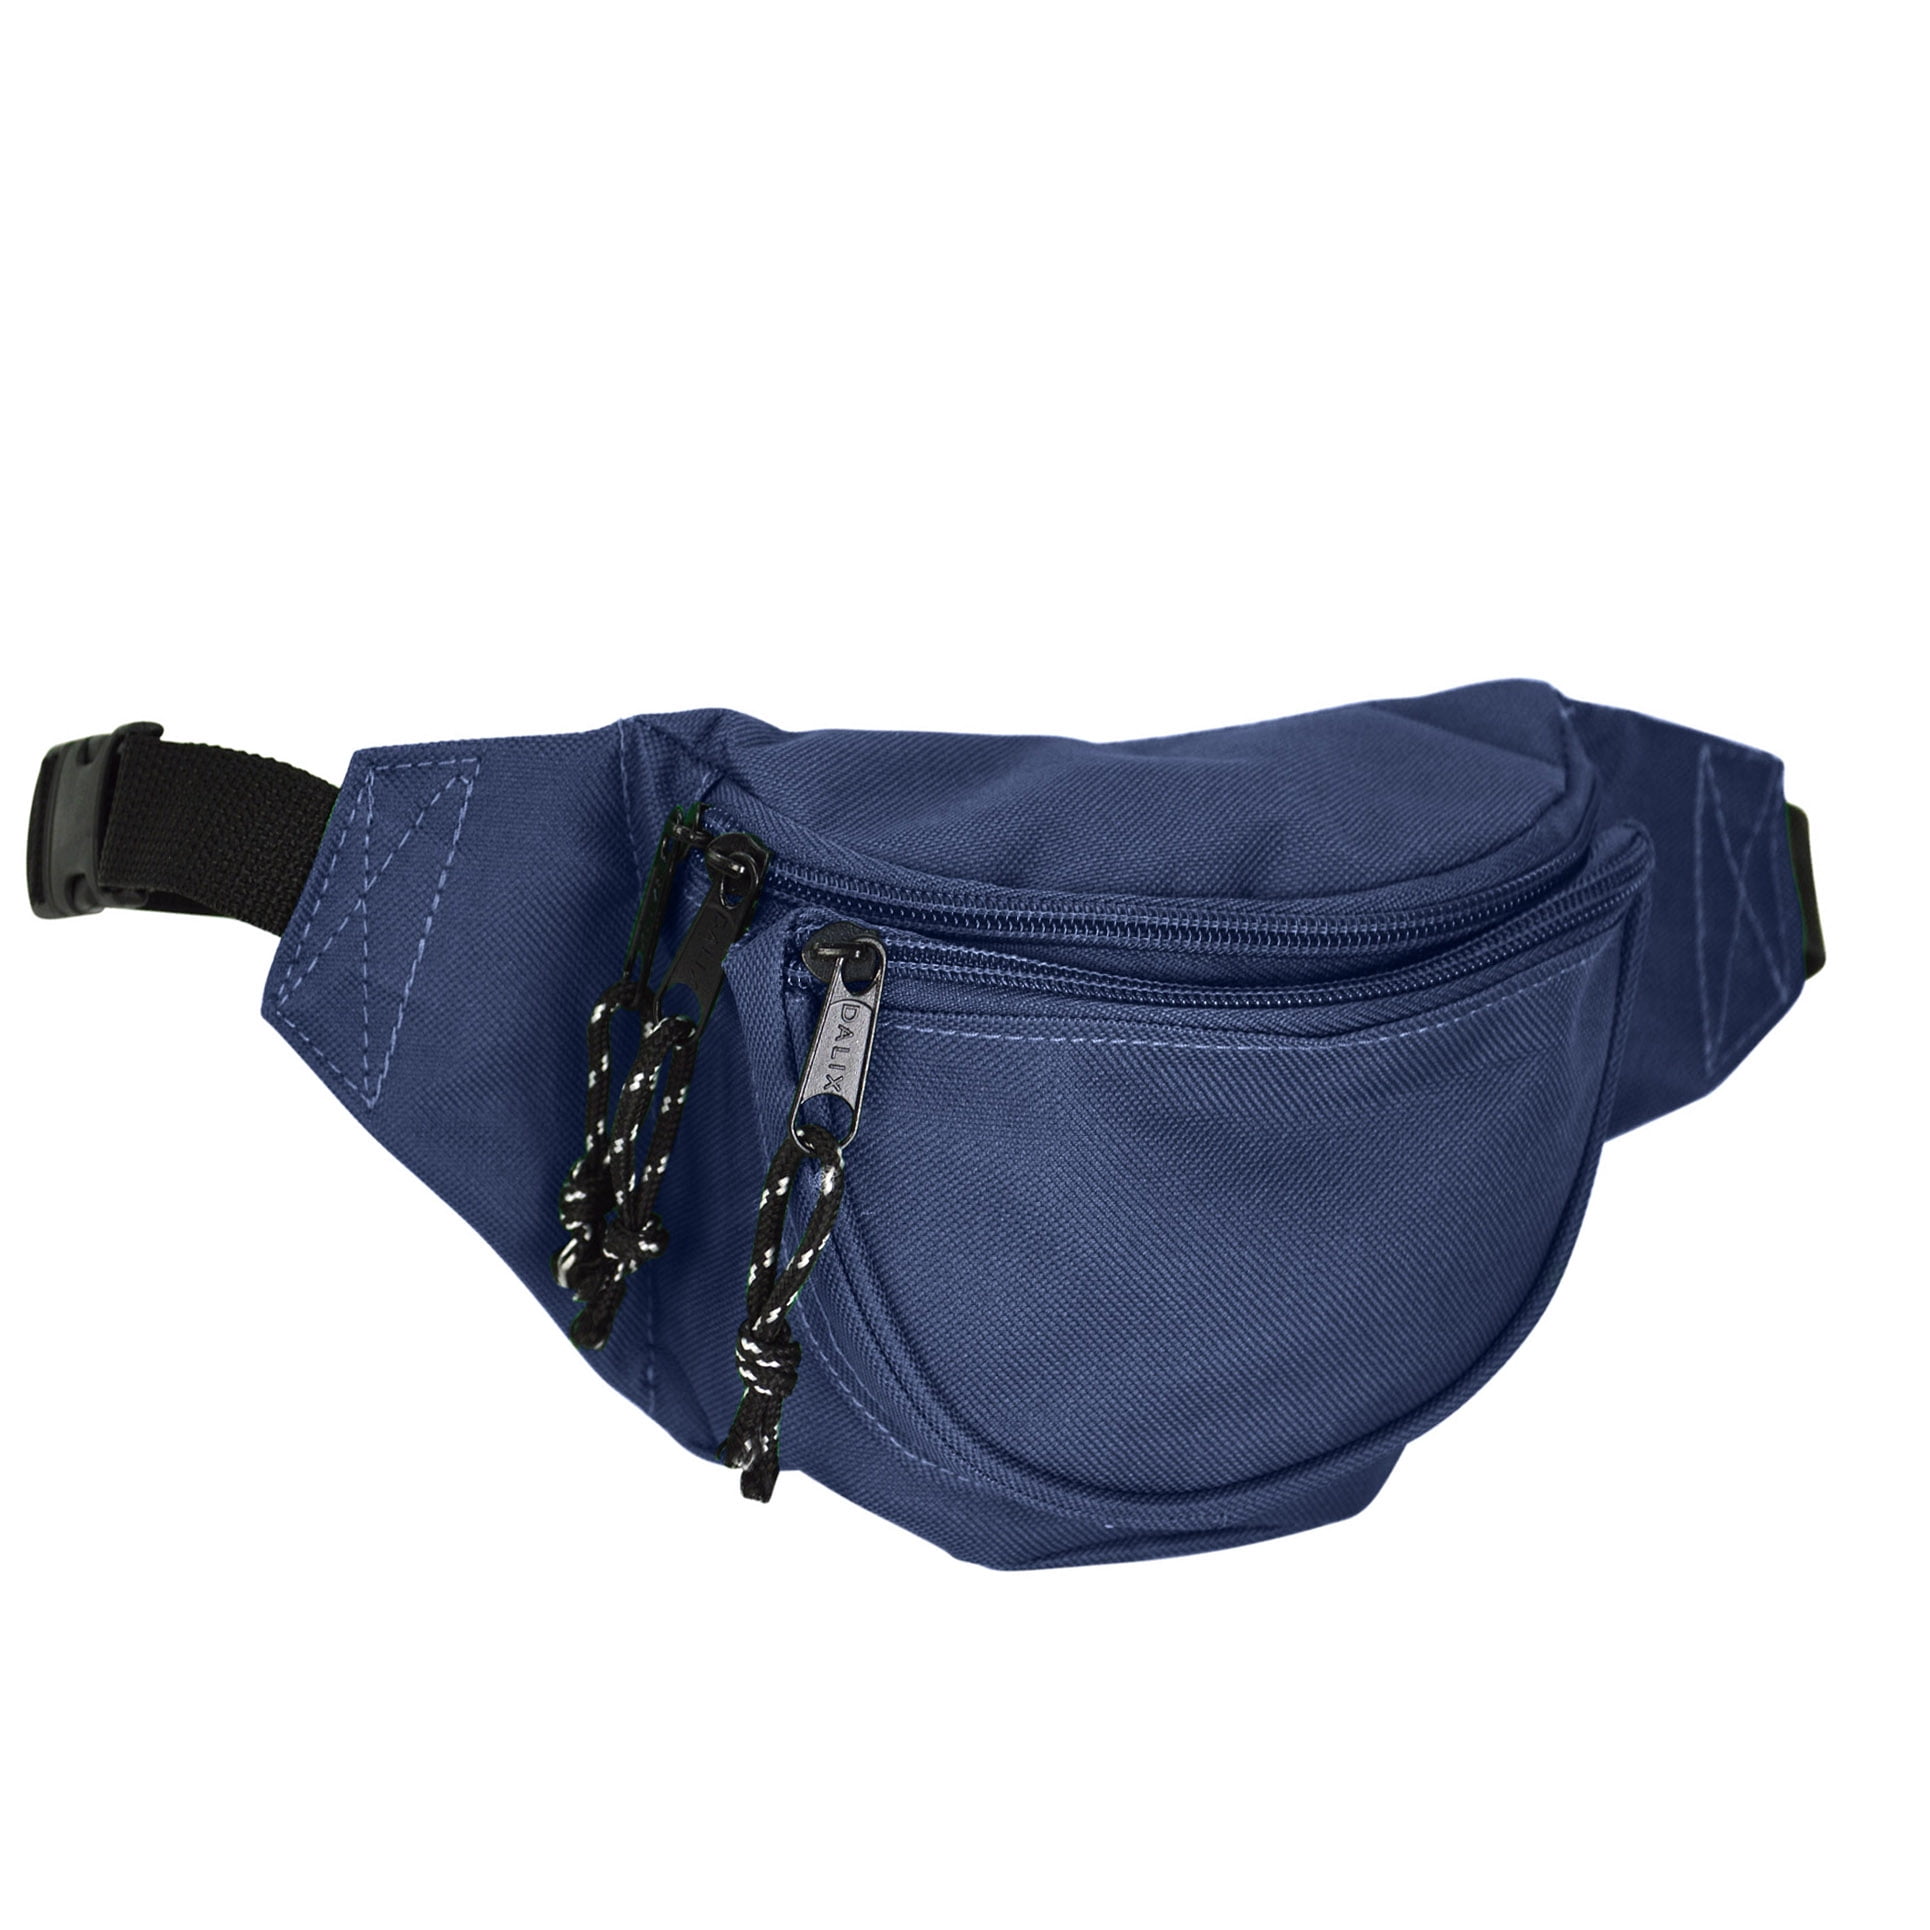 DALIX Small Fanny Pack Waist Pouch S XS Size 24 to 31 in Navy Blue 